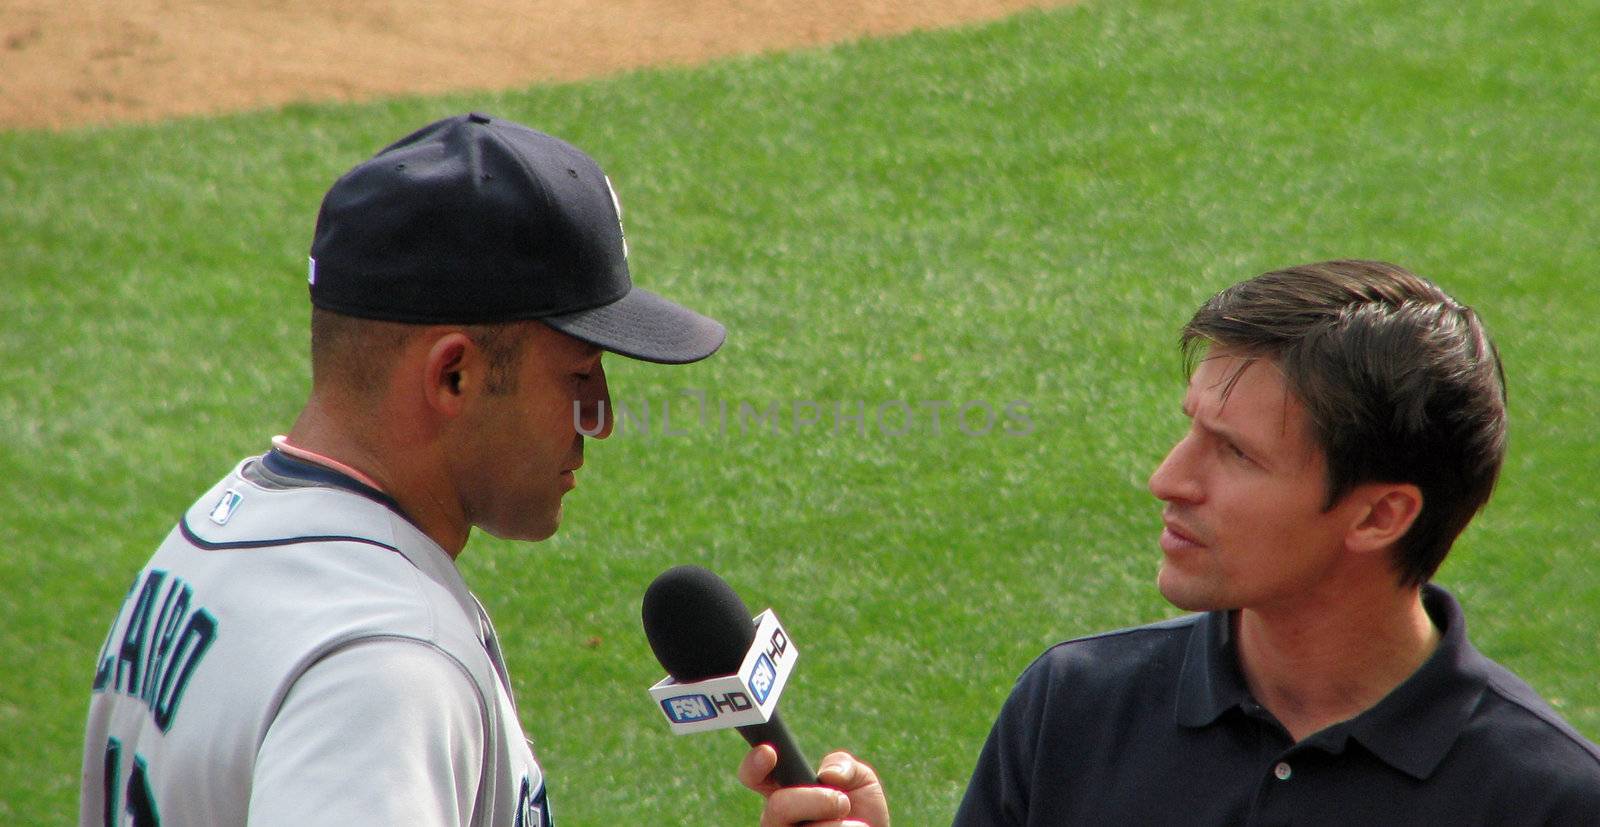 A television reporter interviews a baseball player after the game.
